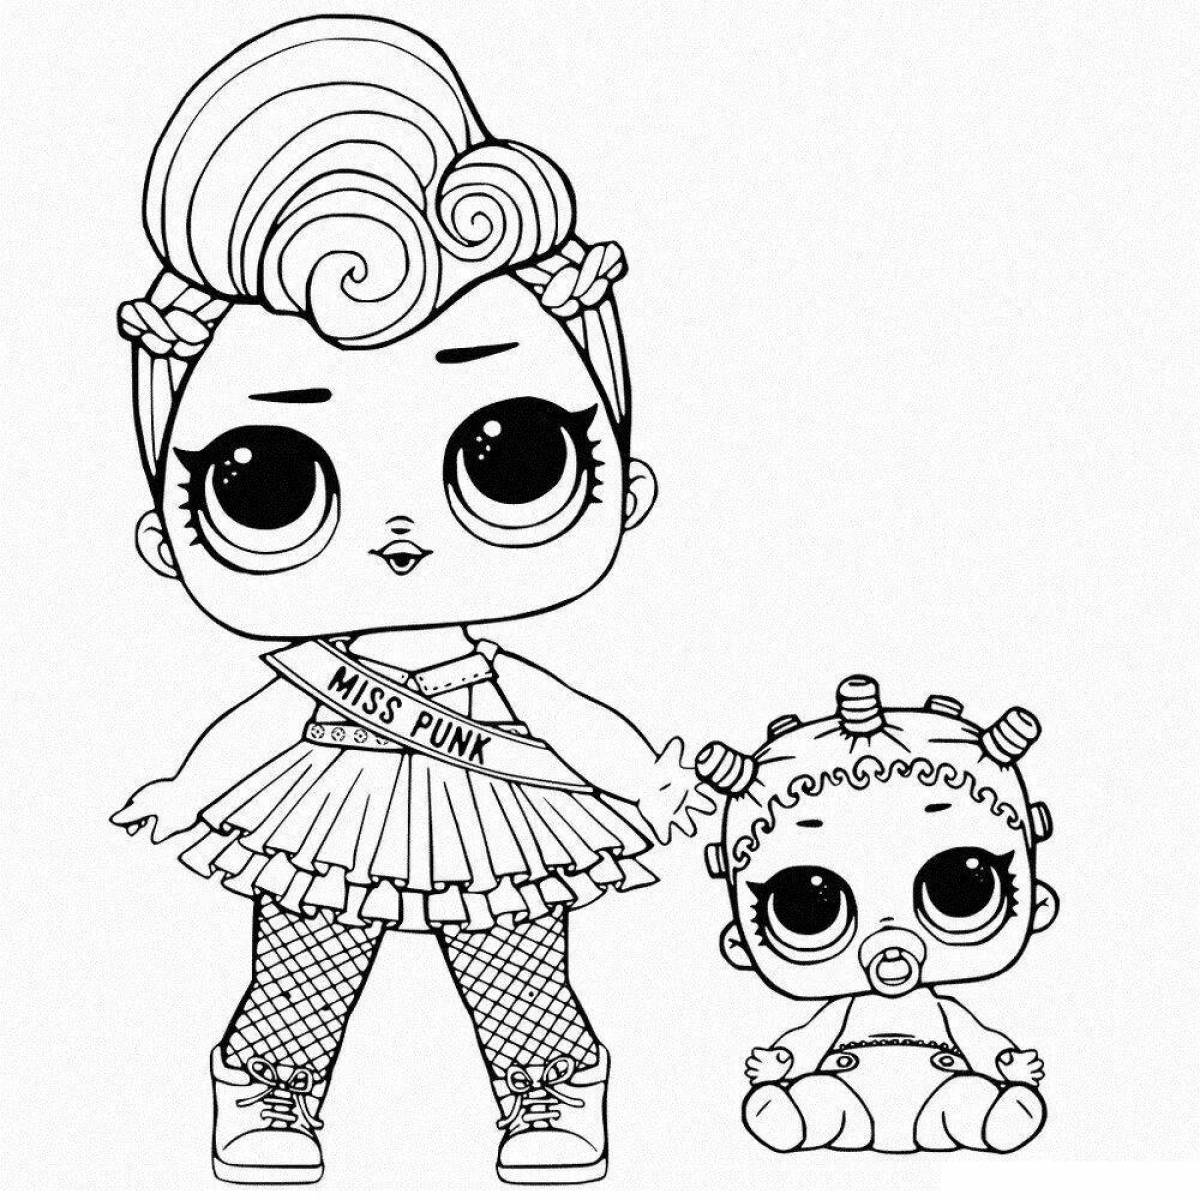 Charming lol doll coloring book for kids